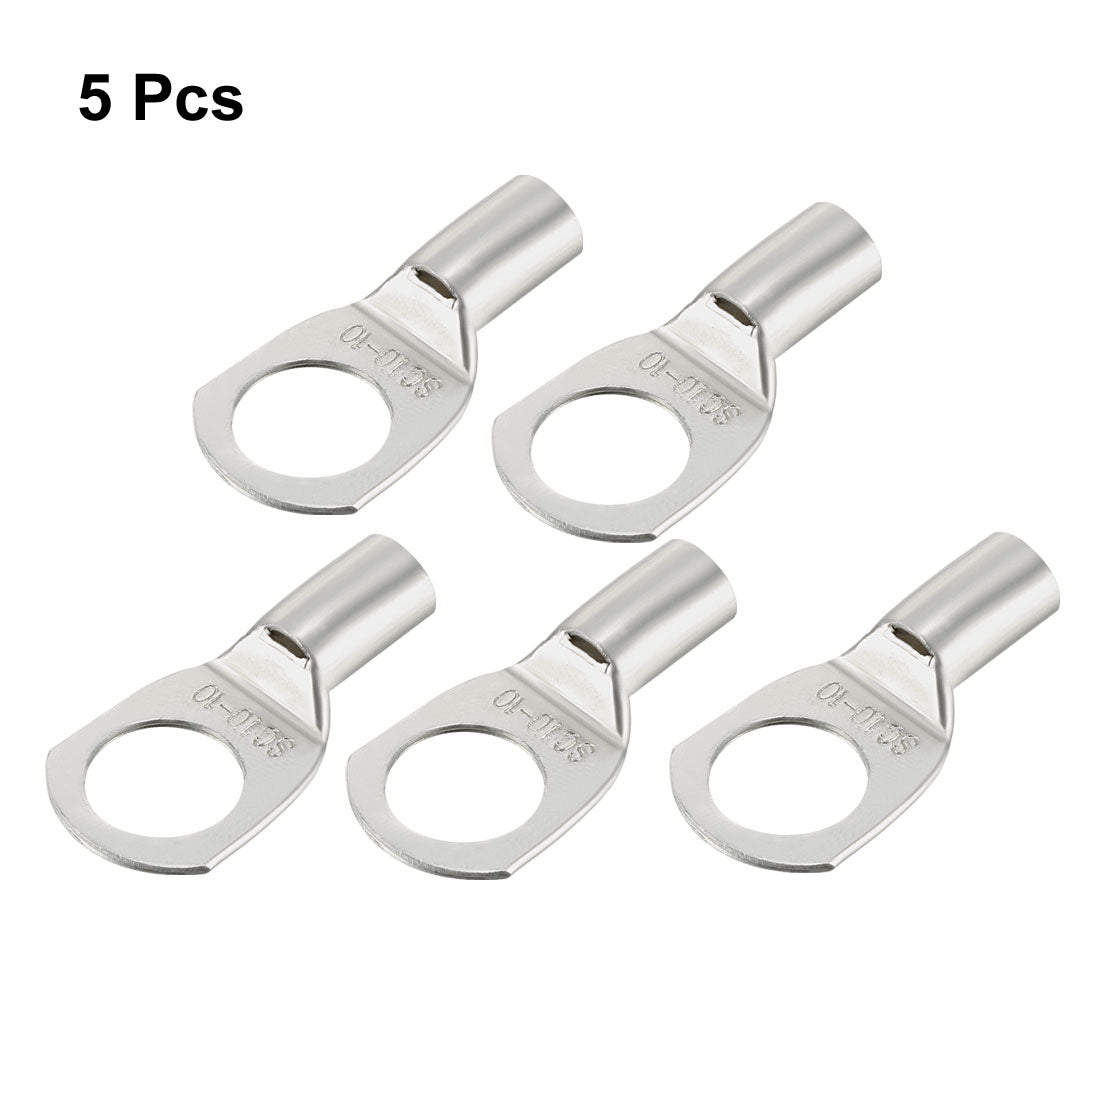 uxcell Uxcell 5Pcs SC10-10 Non-Insulated U-Type Copper Crimp Terminals 10mm2 Wire Connector Silver Tone